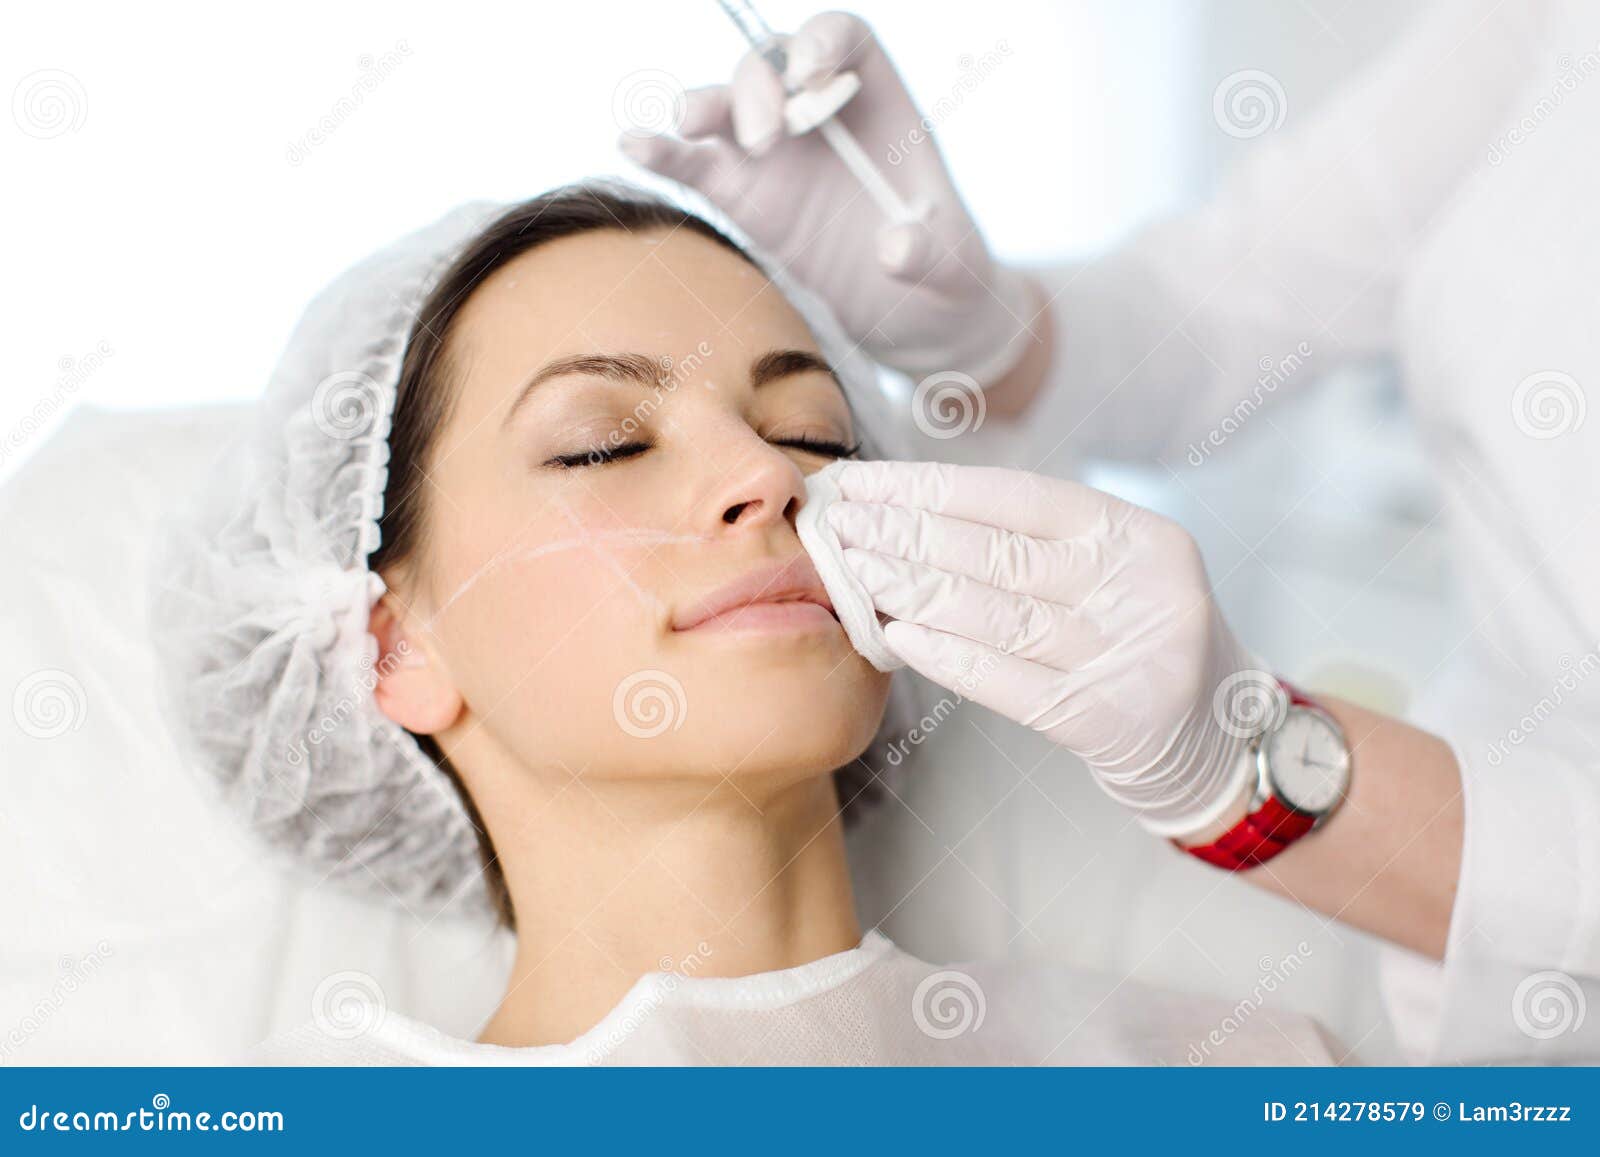 Attractive Young Woman Is Getting A Rejuvenating Facial Injections She Is Sitting Calmly At